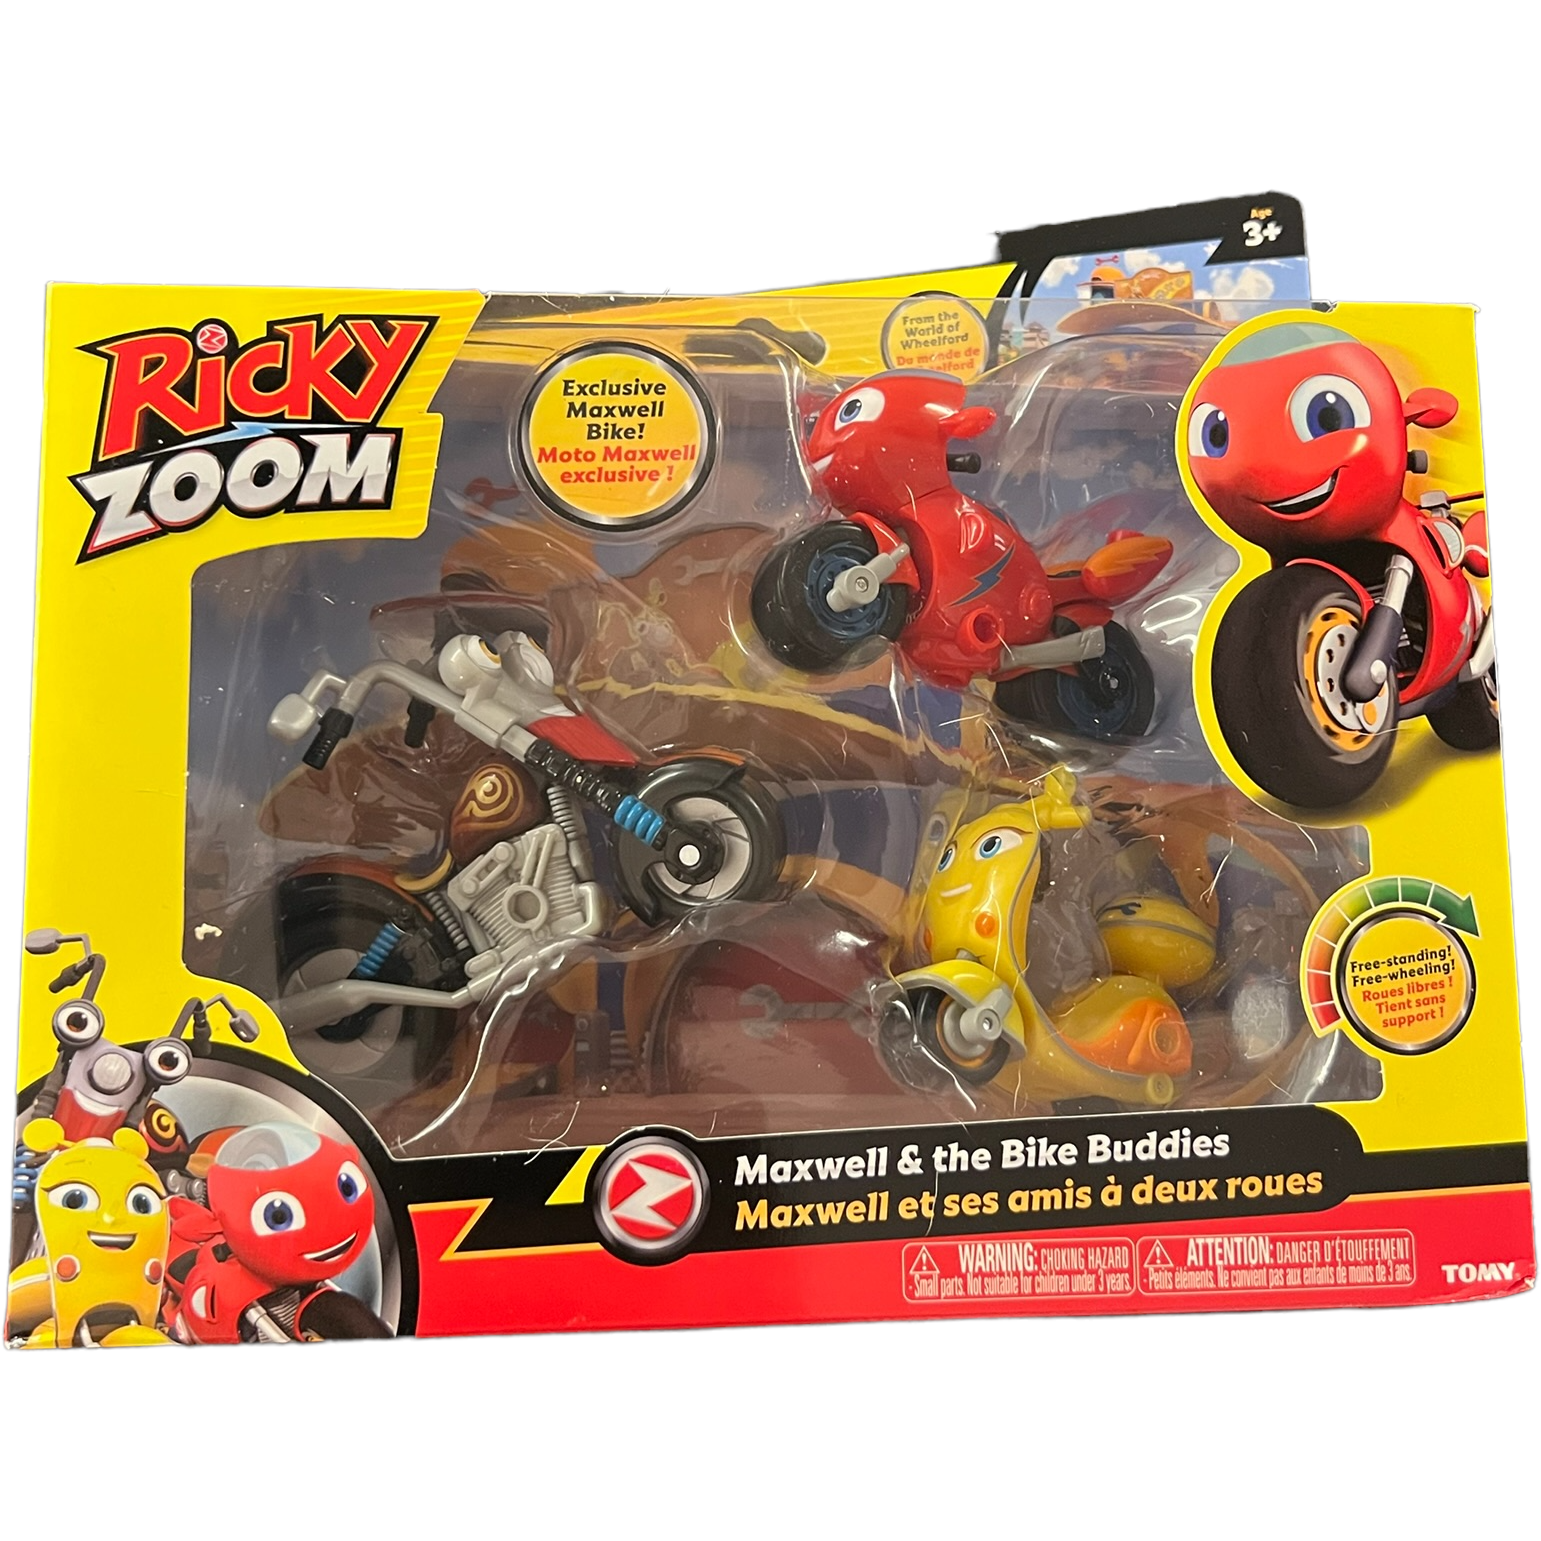 Ricky Zoom. Maxwell & The Bike Buddies – The Toy Cavern